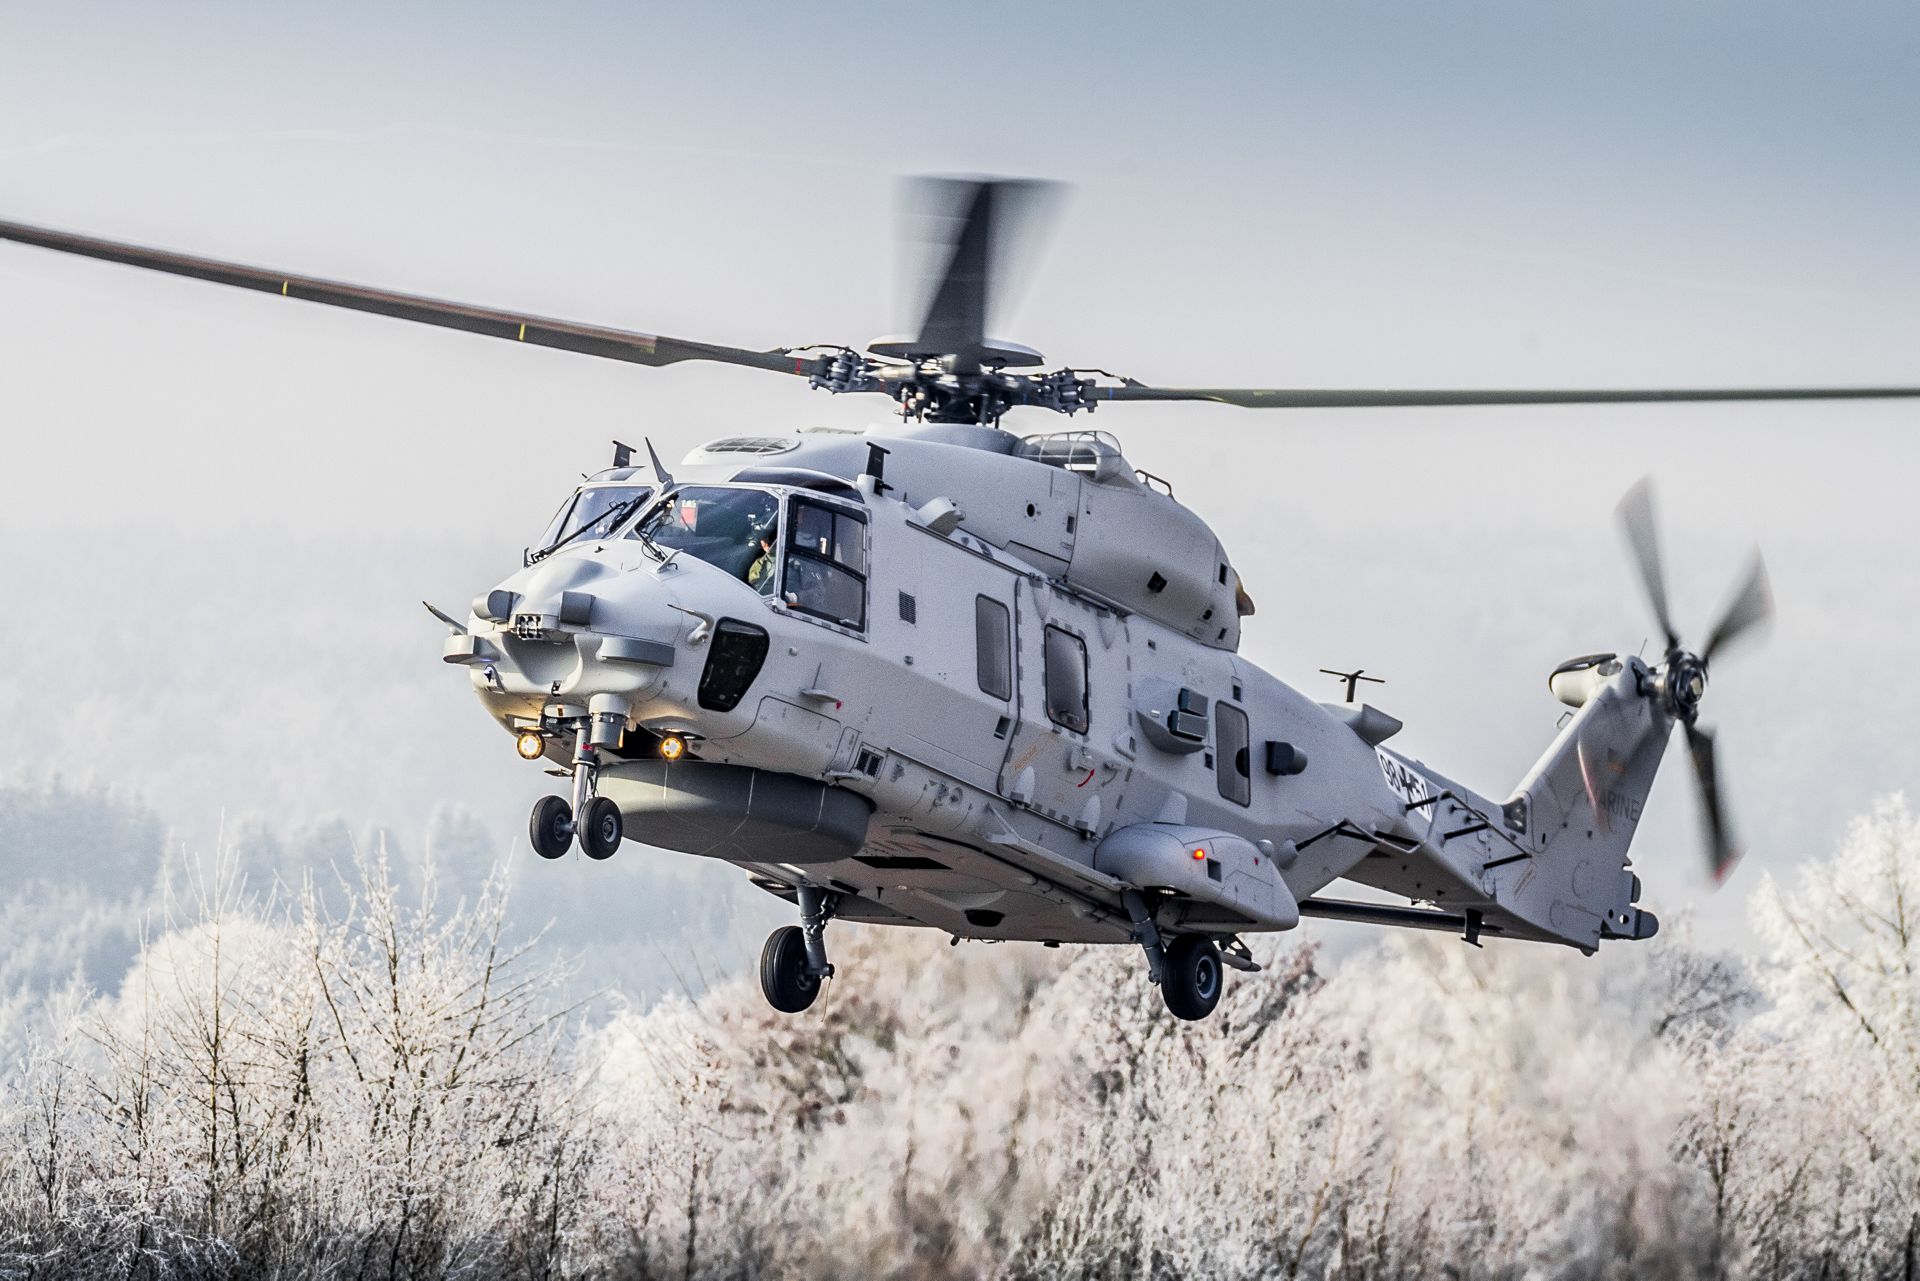 The NH90 Sea Lion naval multi-role helicopter took off on its on-schedule maiden flight at Airbus Helicopters in Donauwörth